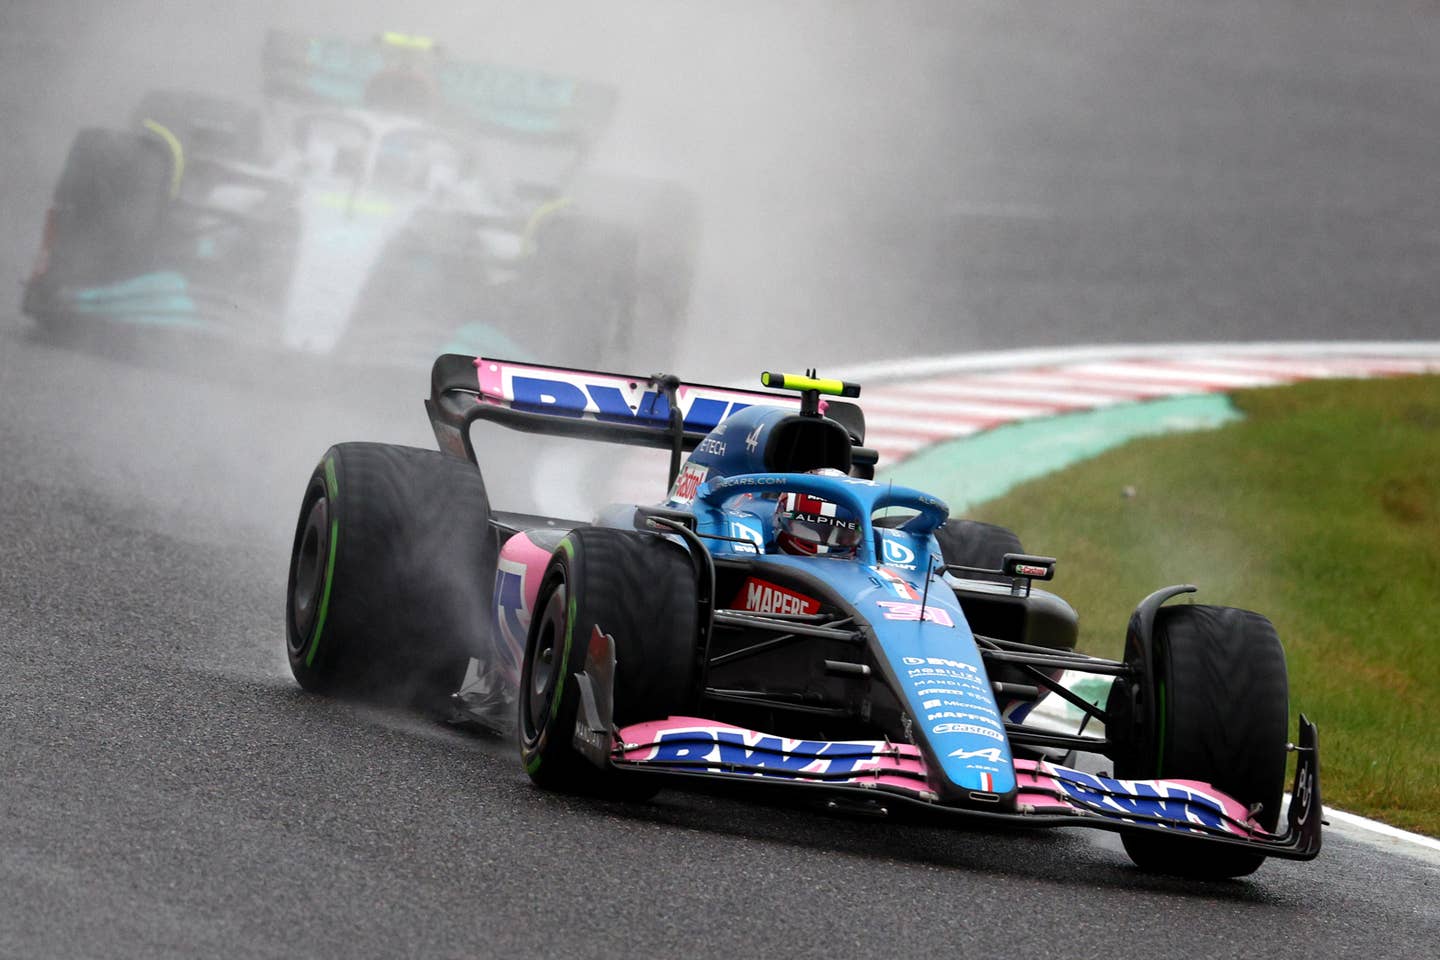 Esteban Ocon (31) Alpine F1 A522, October 09, 2022 in Suzuka, Japan | Photo by Clive Rose/Getty Images